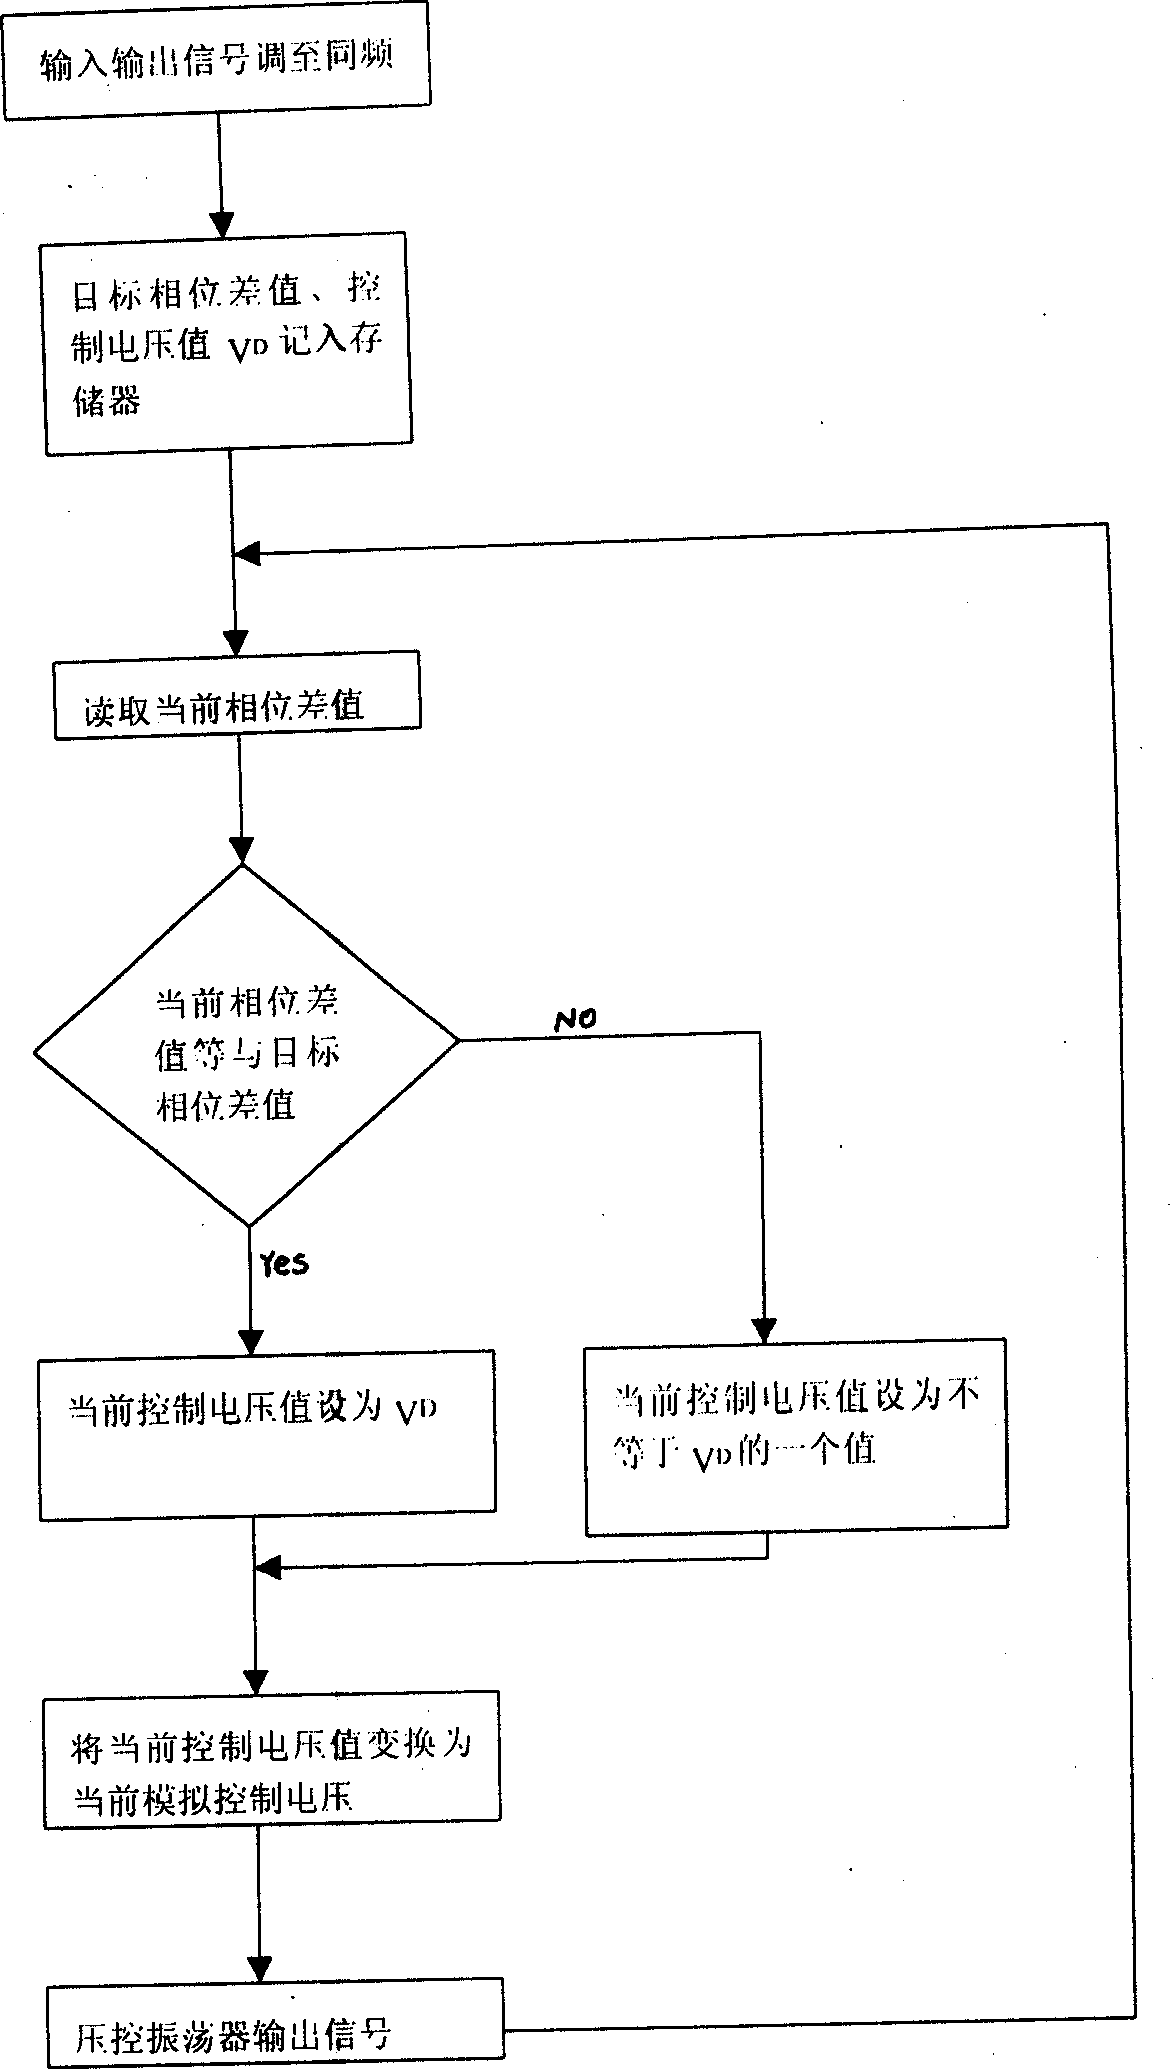 Method for synchronizing timing output signal in digital communication equipment